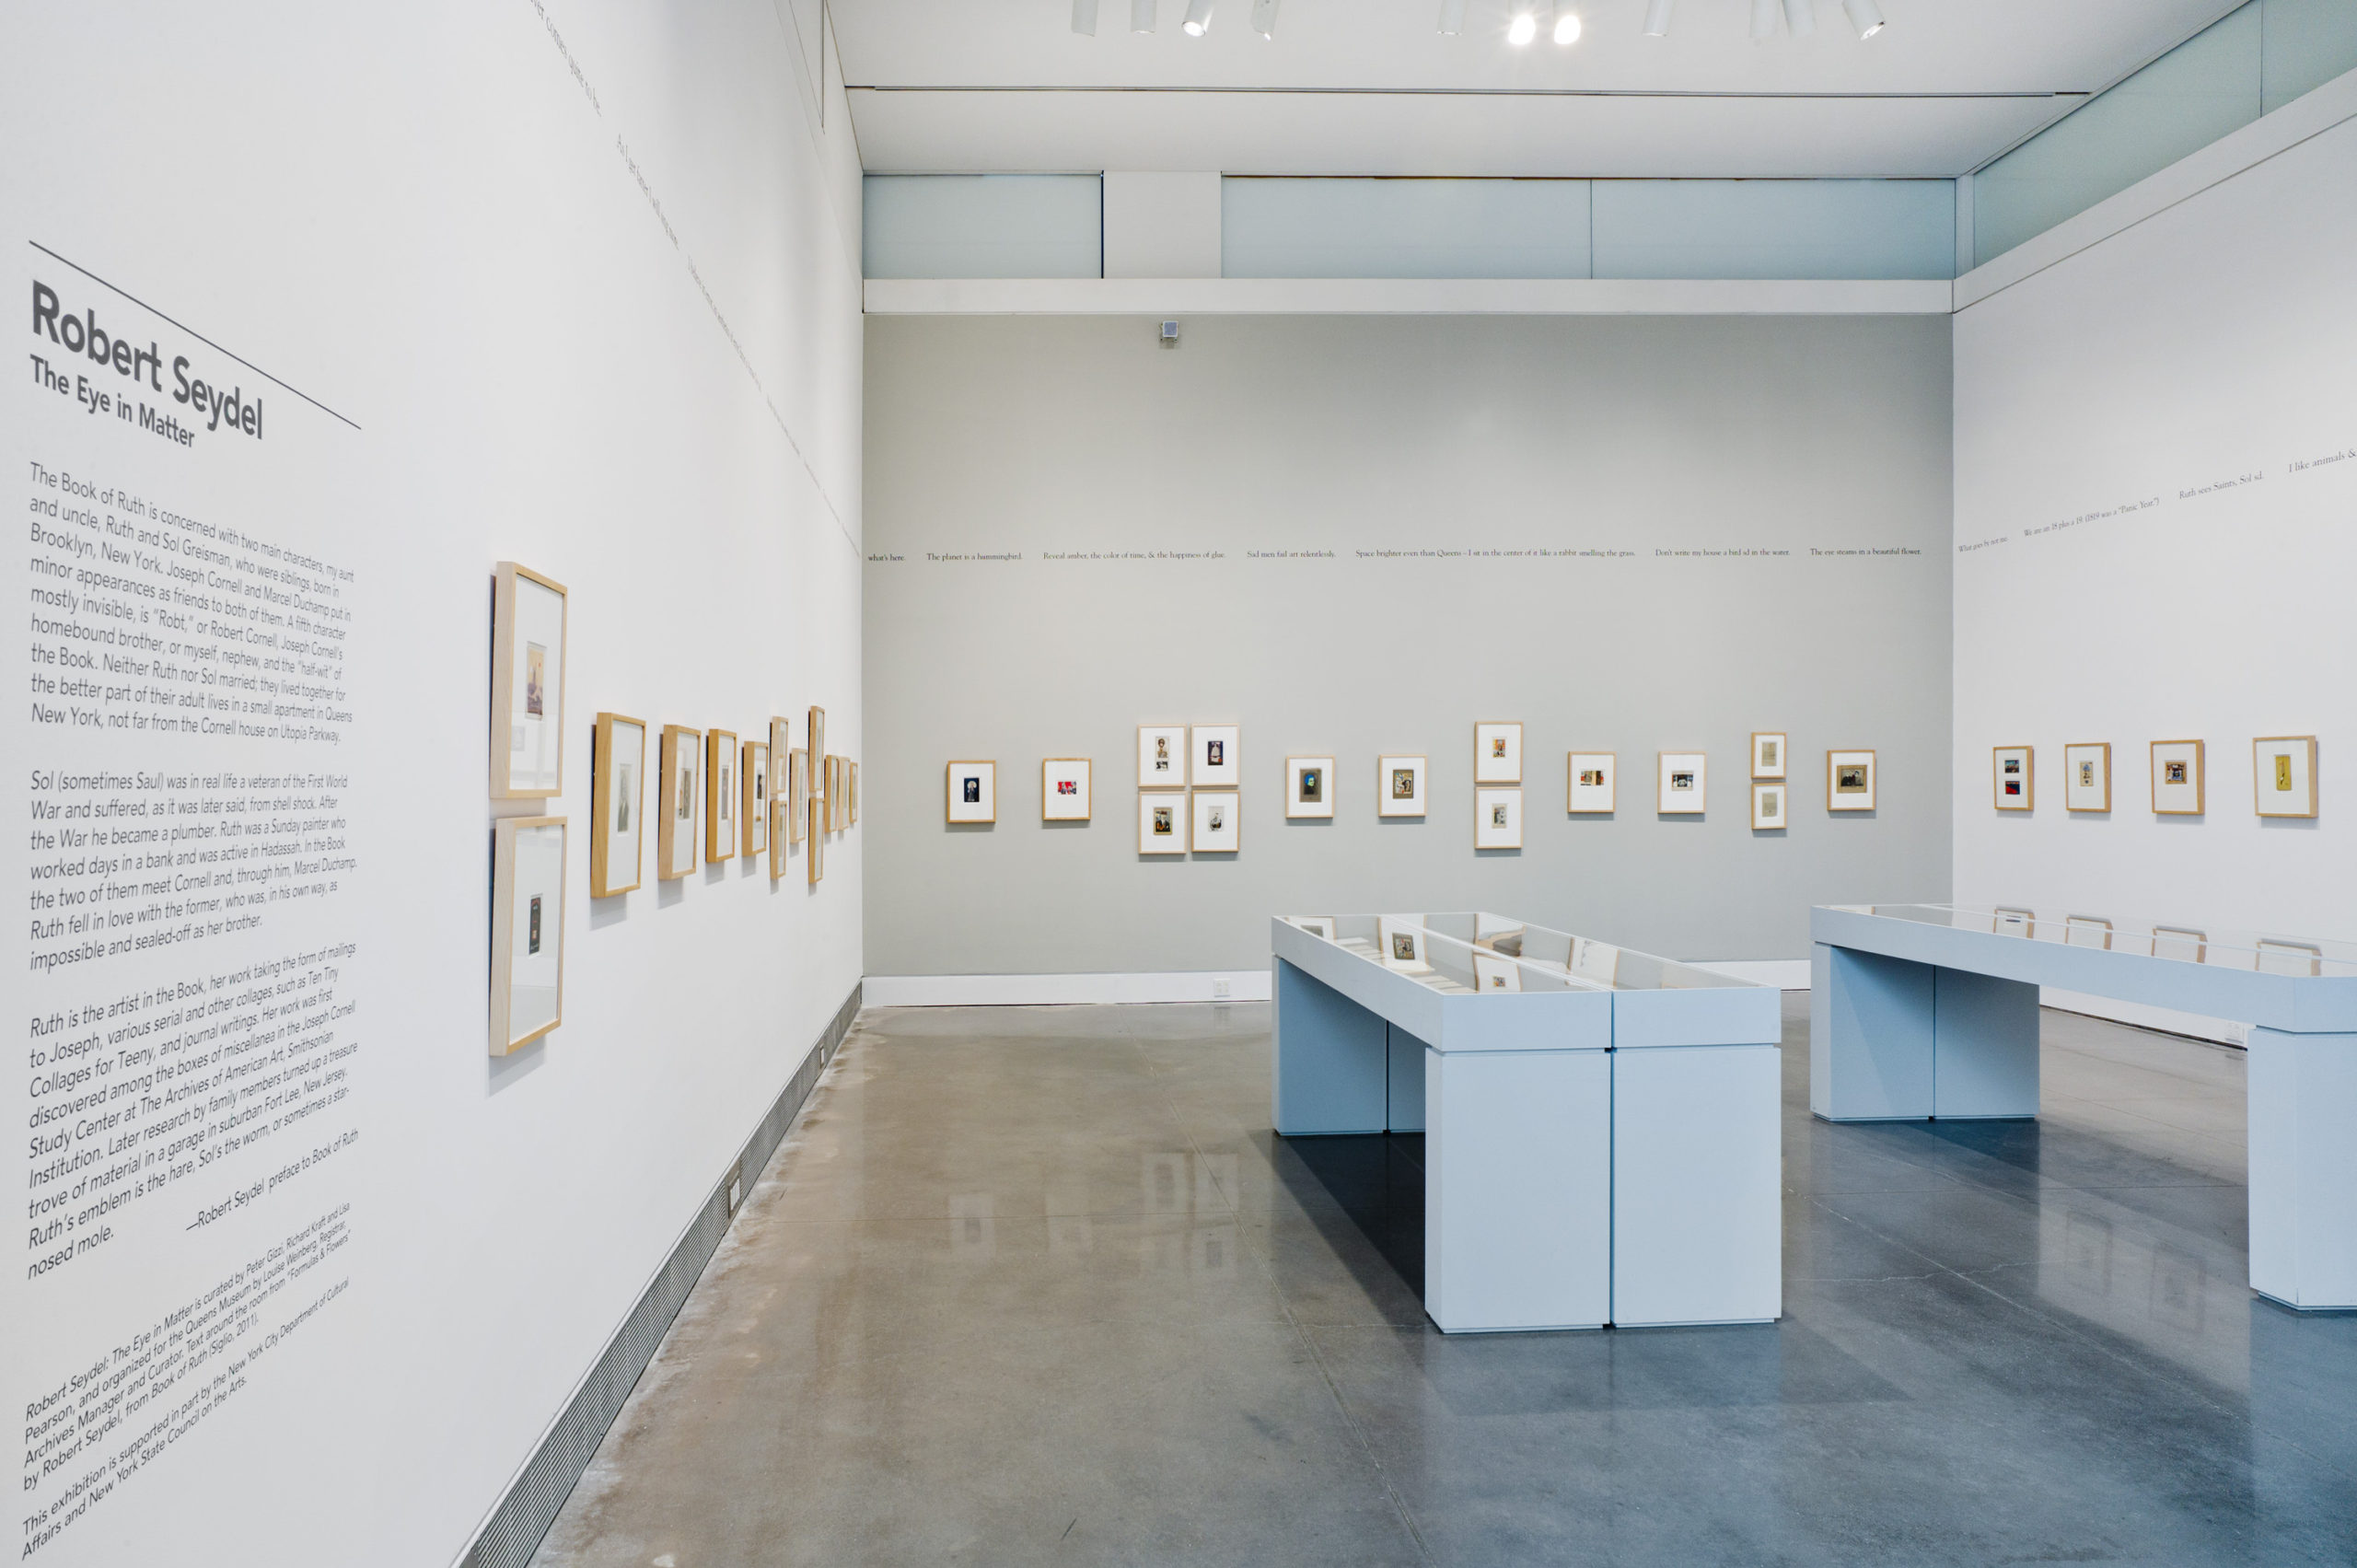 An exhibition room with white and gray walls. Starting on the left wall is a block of exhibition text, the featured artist’s name, followed by the show title; “Robert Seydel, The Eye in Matter”. Following the wall text is a series of framed and matted collages that wrap around three walls. On the exhibition floor are two white display cases.